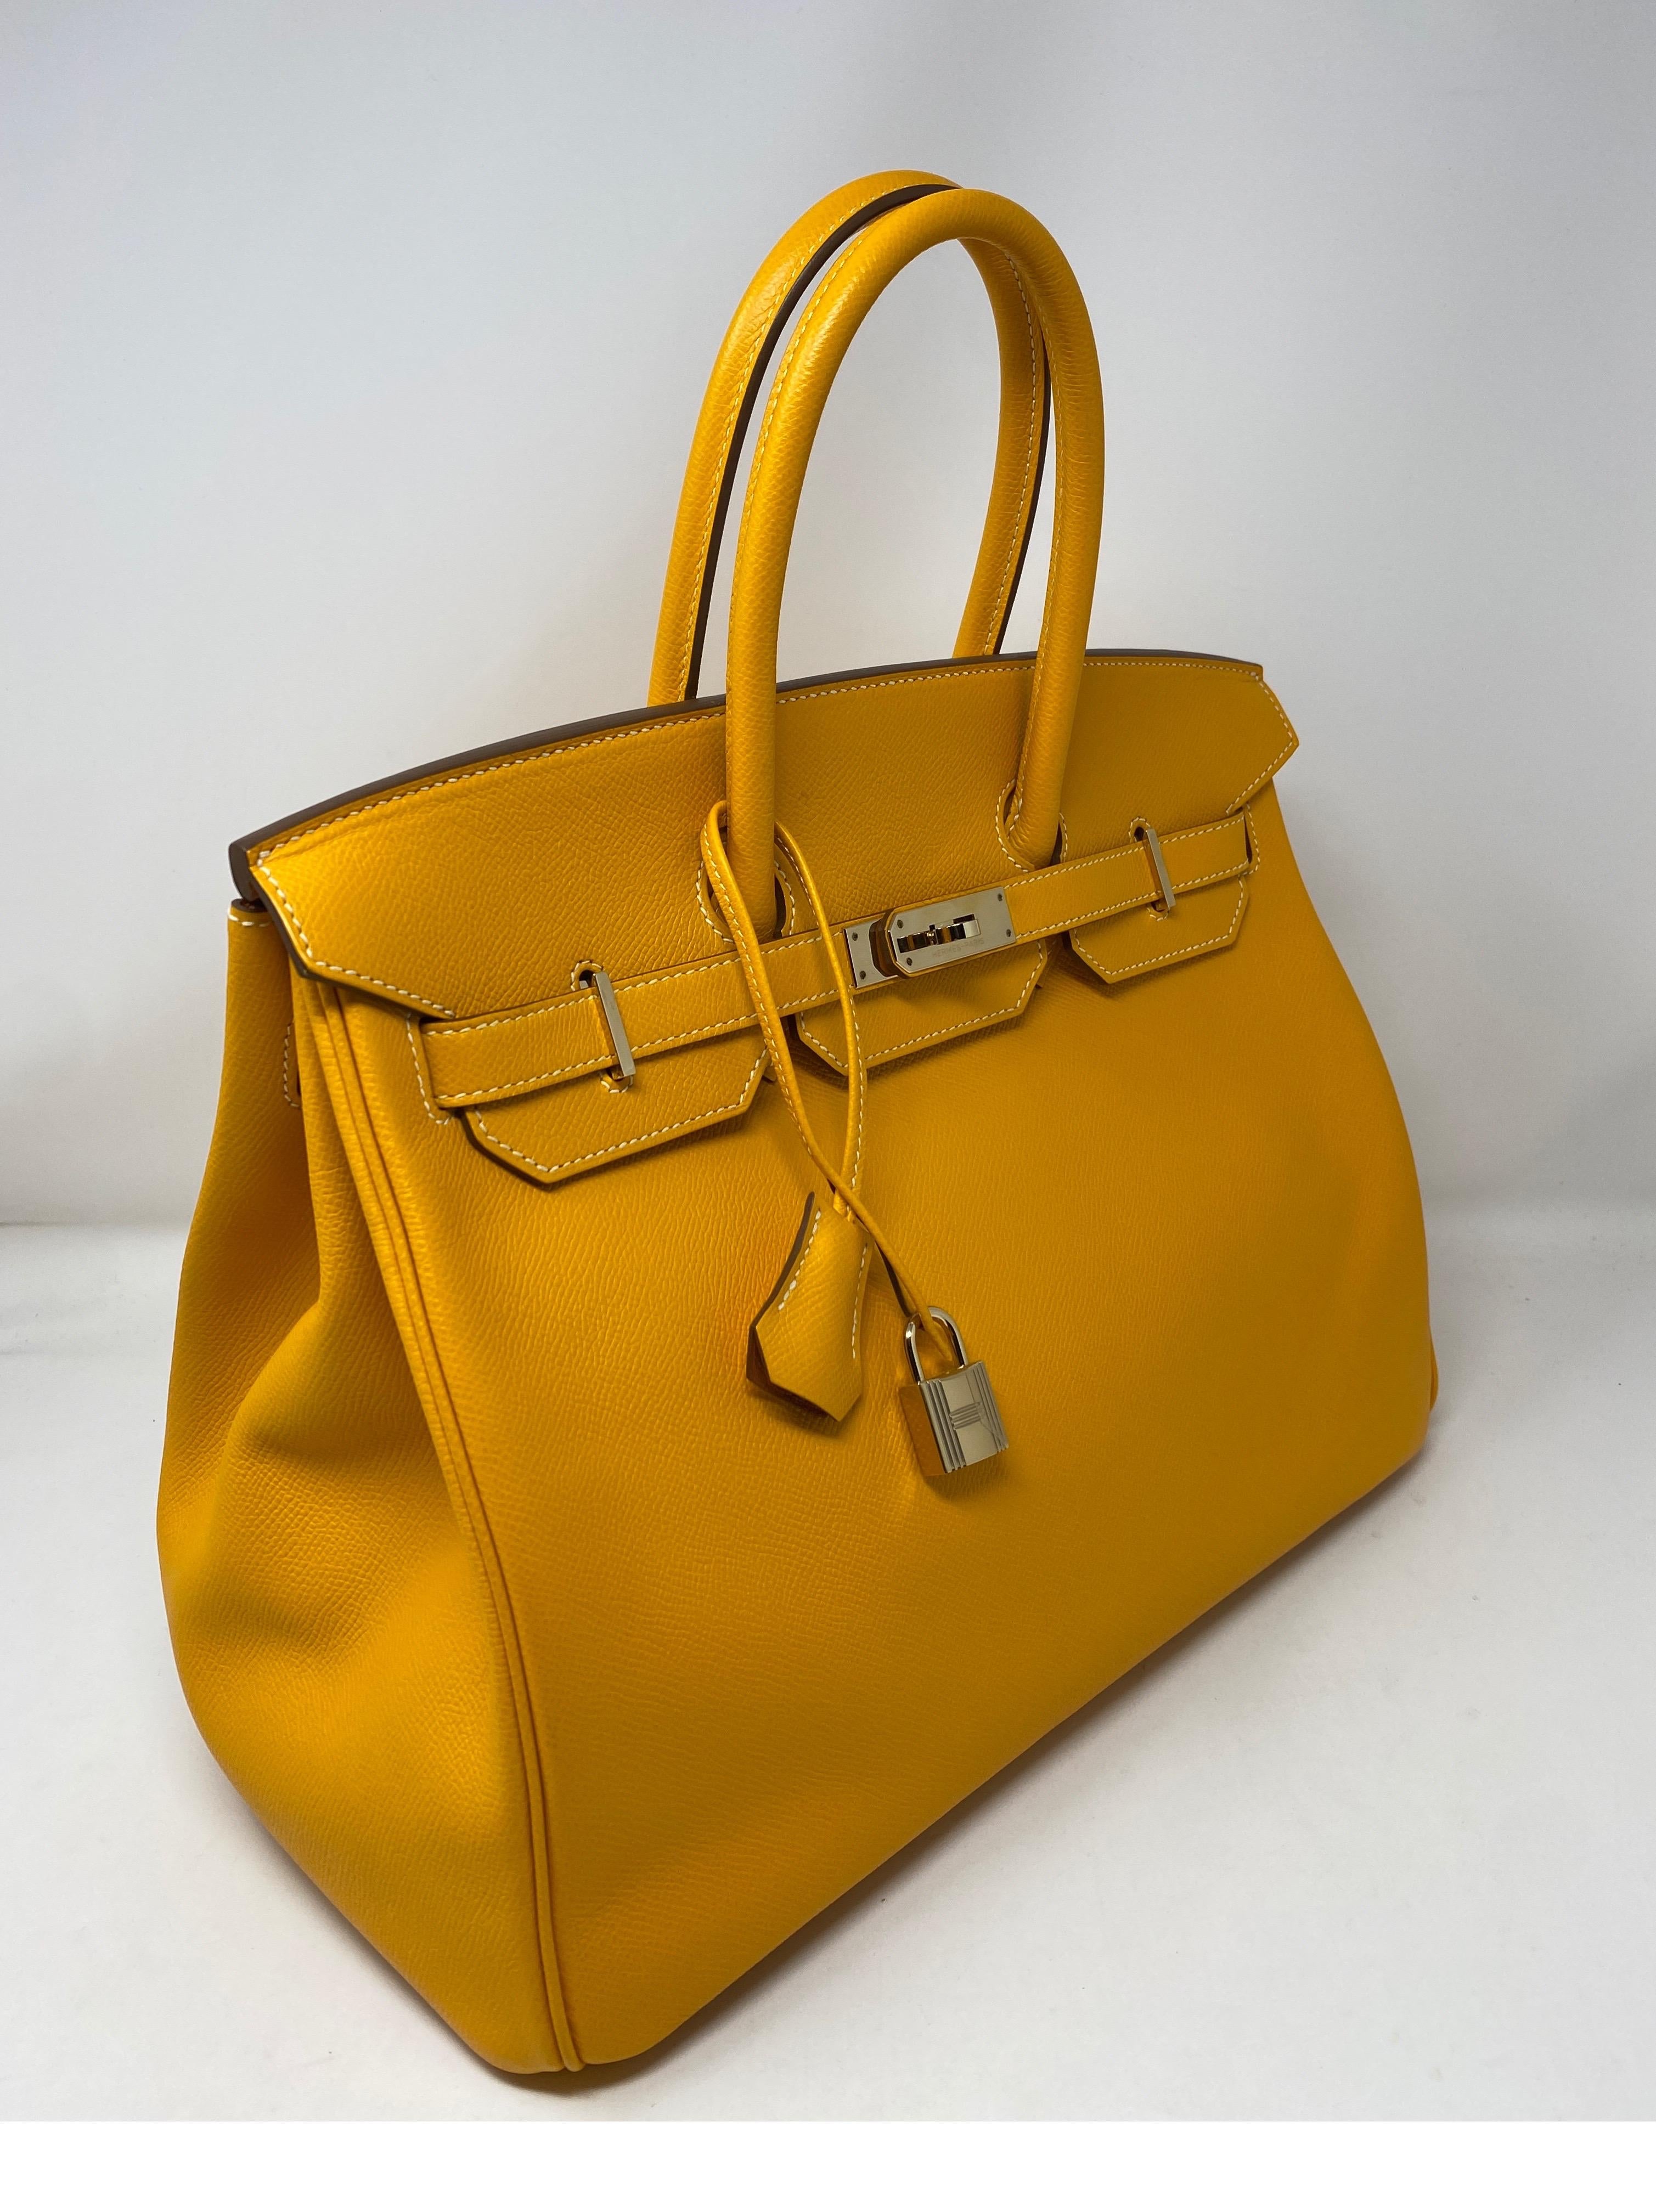 Hermes Jaune D'or Candy Birkin Bag. Candy interior d'or orange color. Exterior yellow Jaune color. Epsom leather. Permabrass hardware. P stamp. From 2012. Looks brand new. Plastic still on hardware. Bright yellow color Birkin. Great addition to your